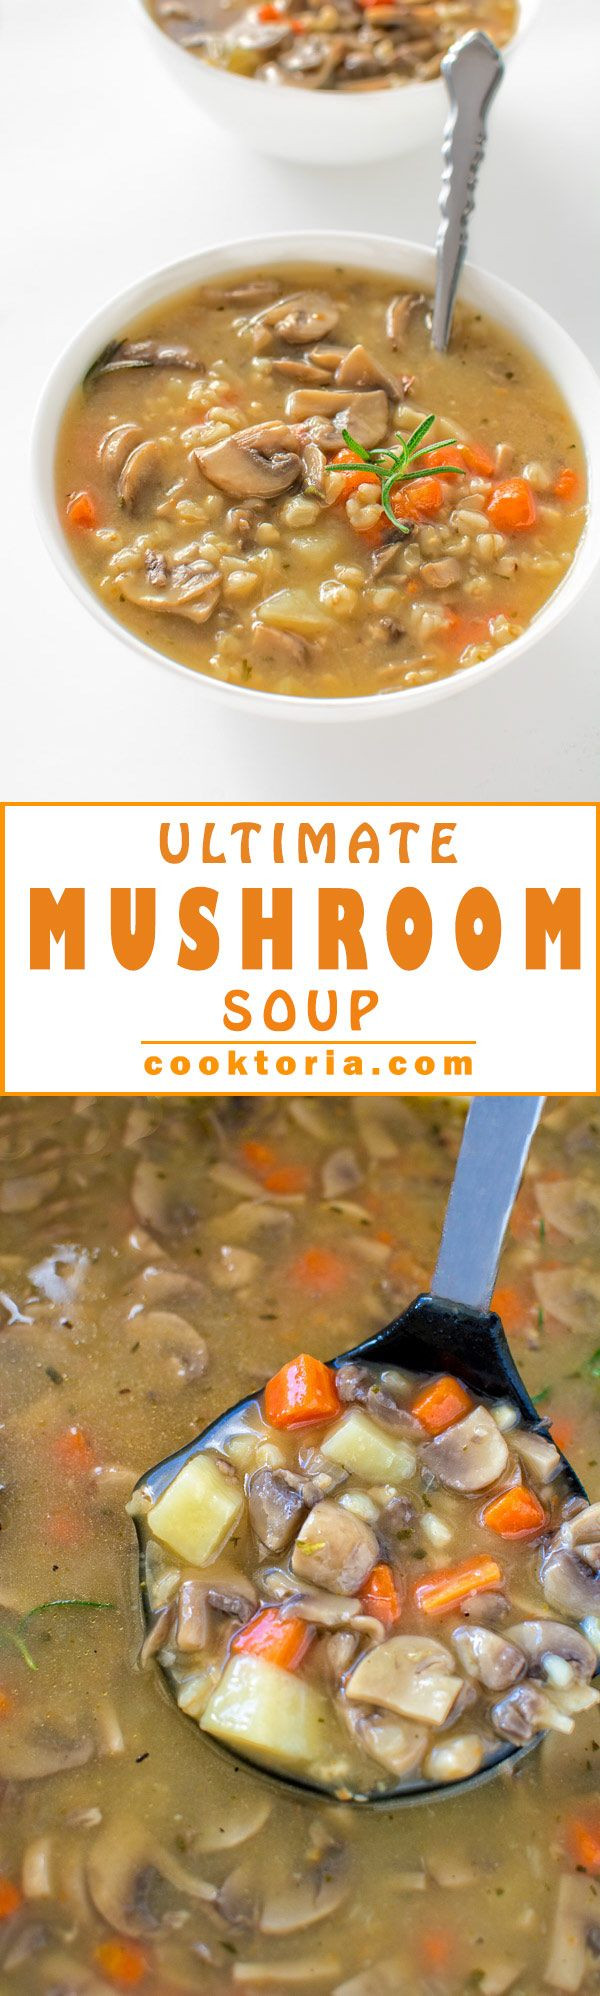 Low Calorie Mushroom Recipes
 Hearty and forting healthy and low calorie this